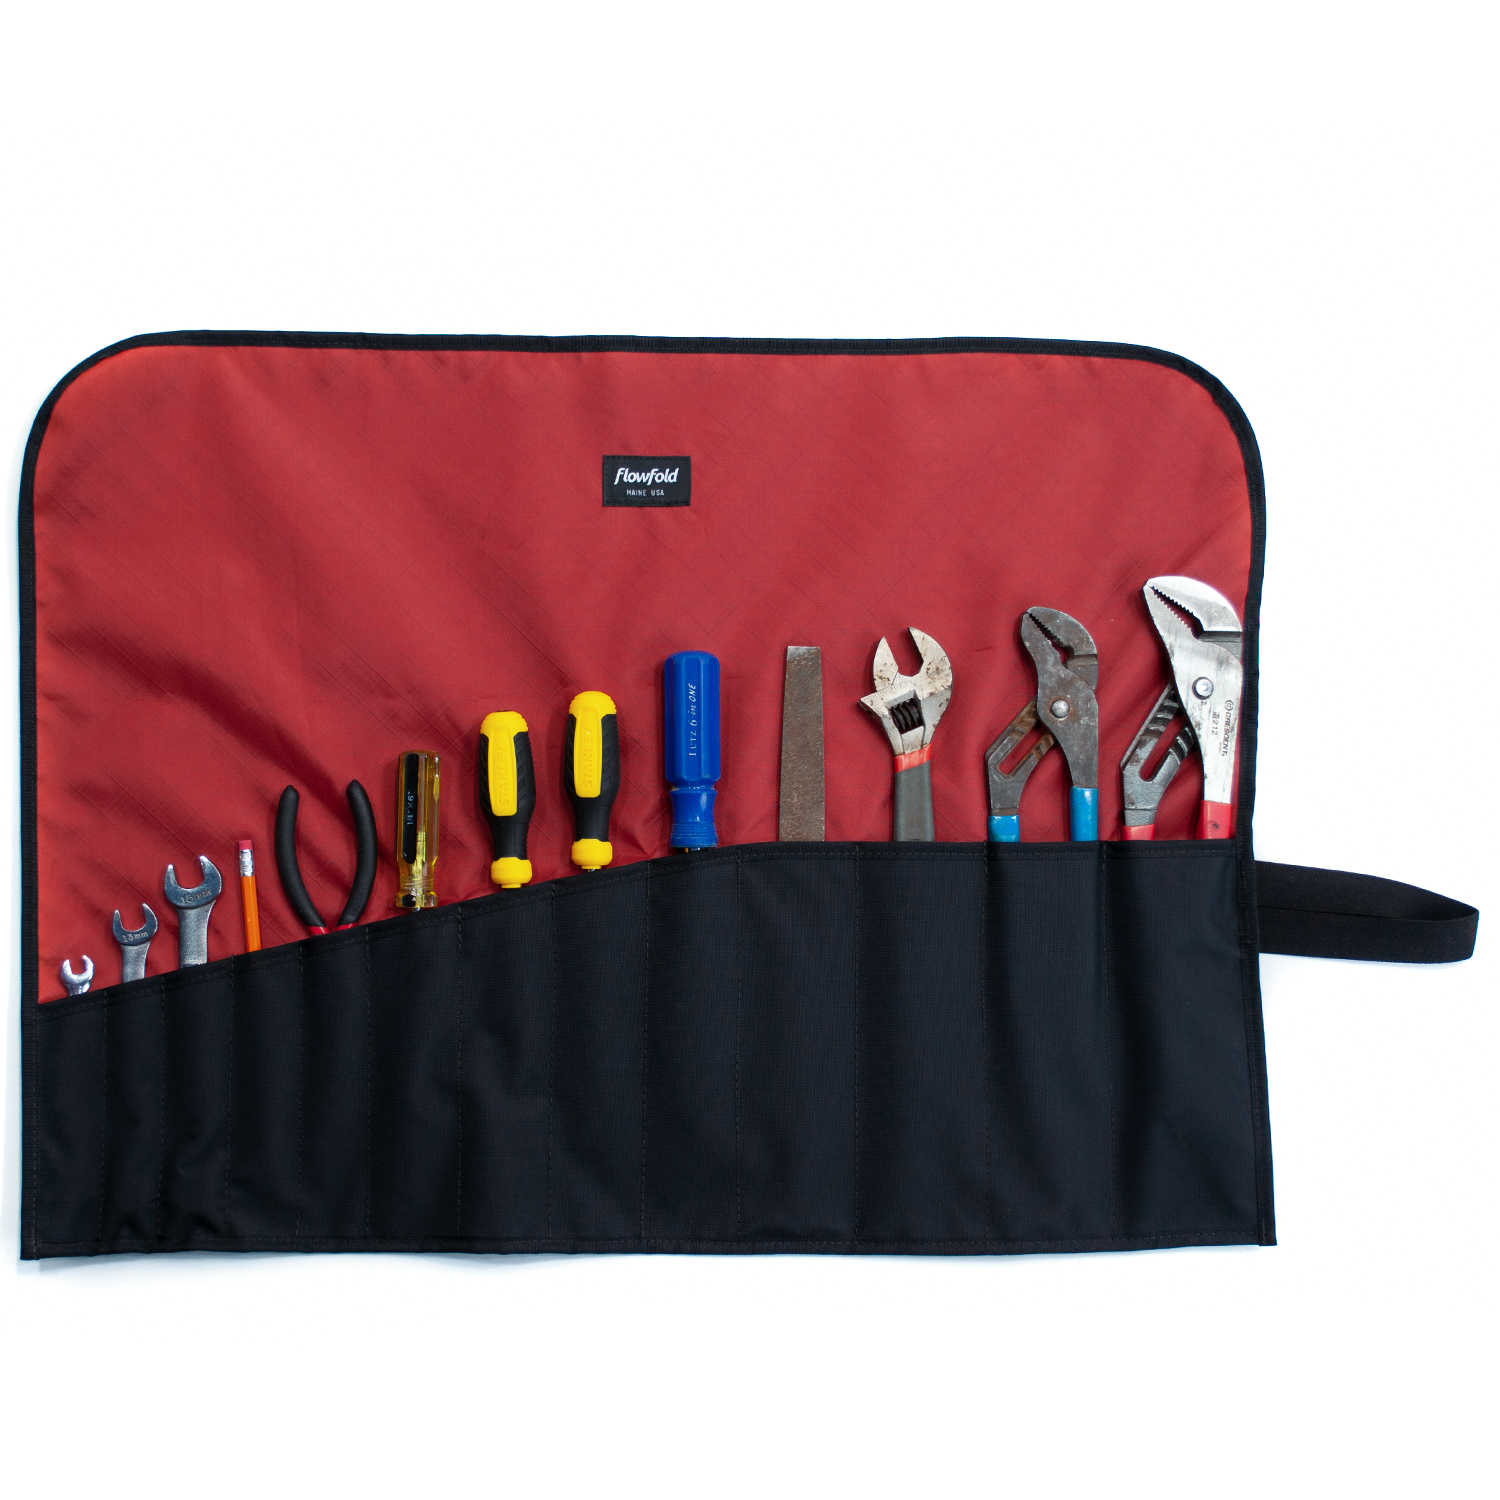 Flowfold Large Comrade Tool Roll 100% Recycled fabric tool roll, water repellent and made in USA Brick Red